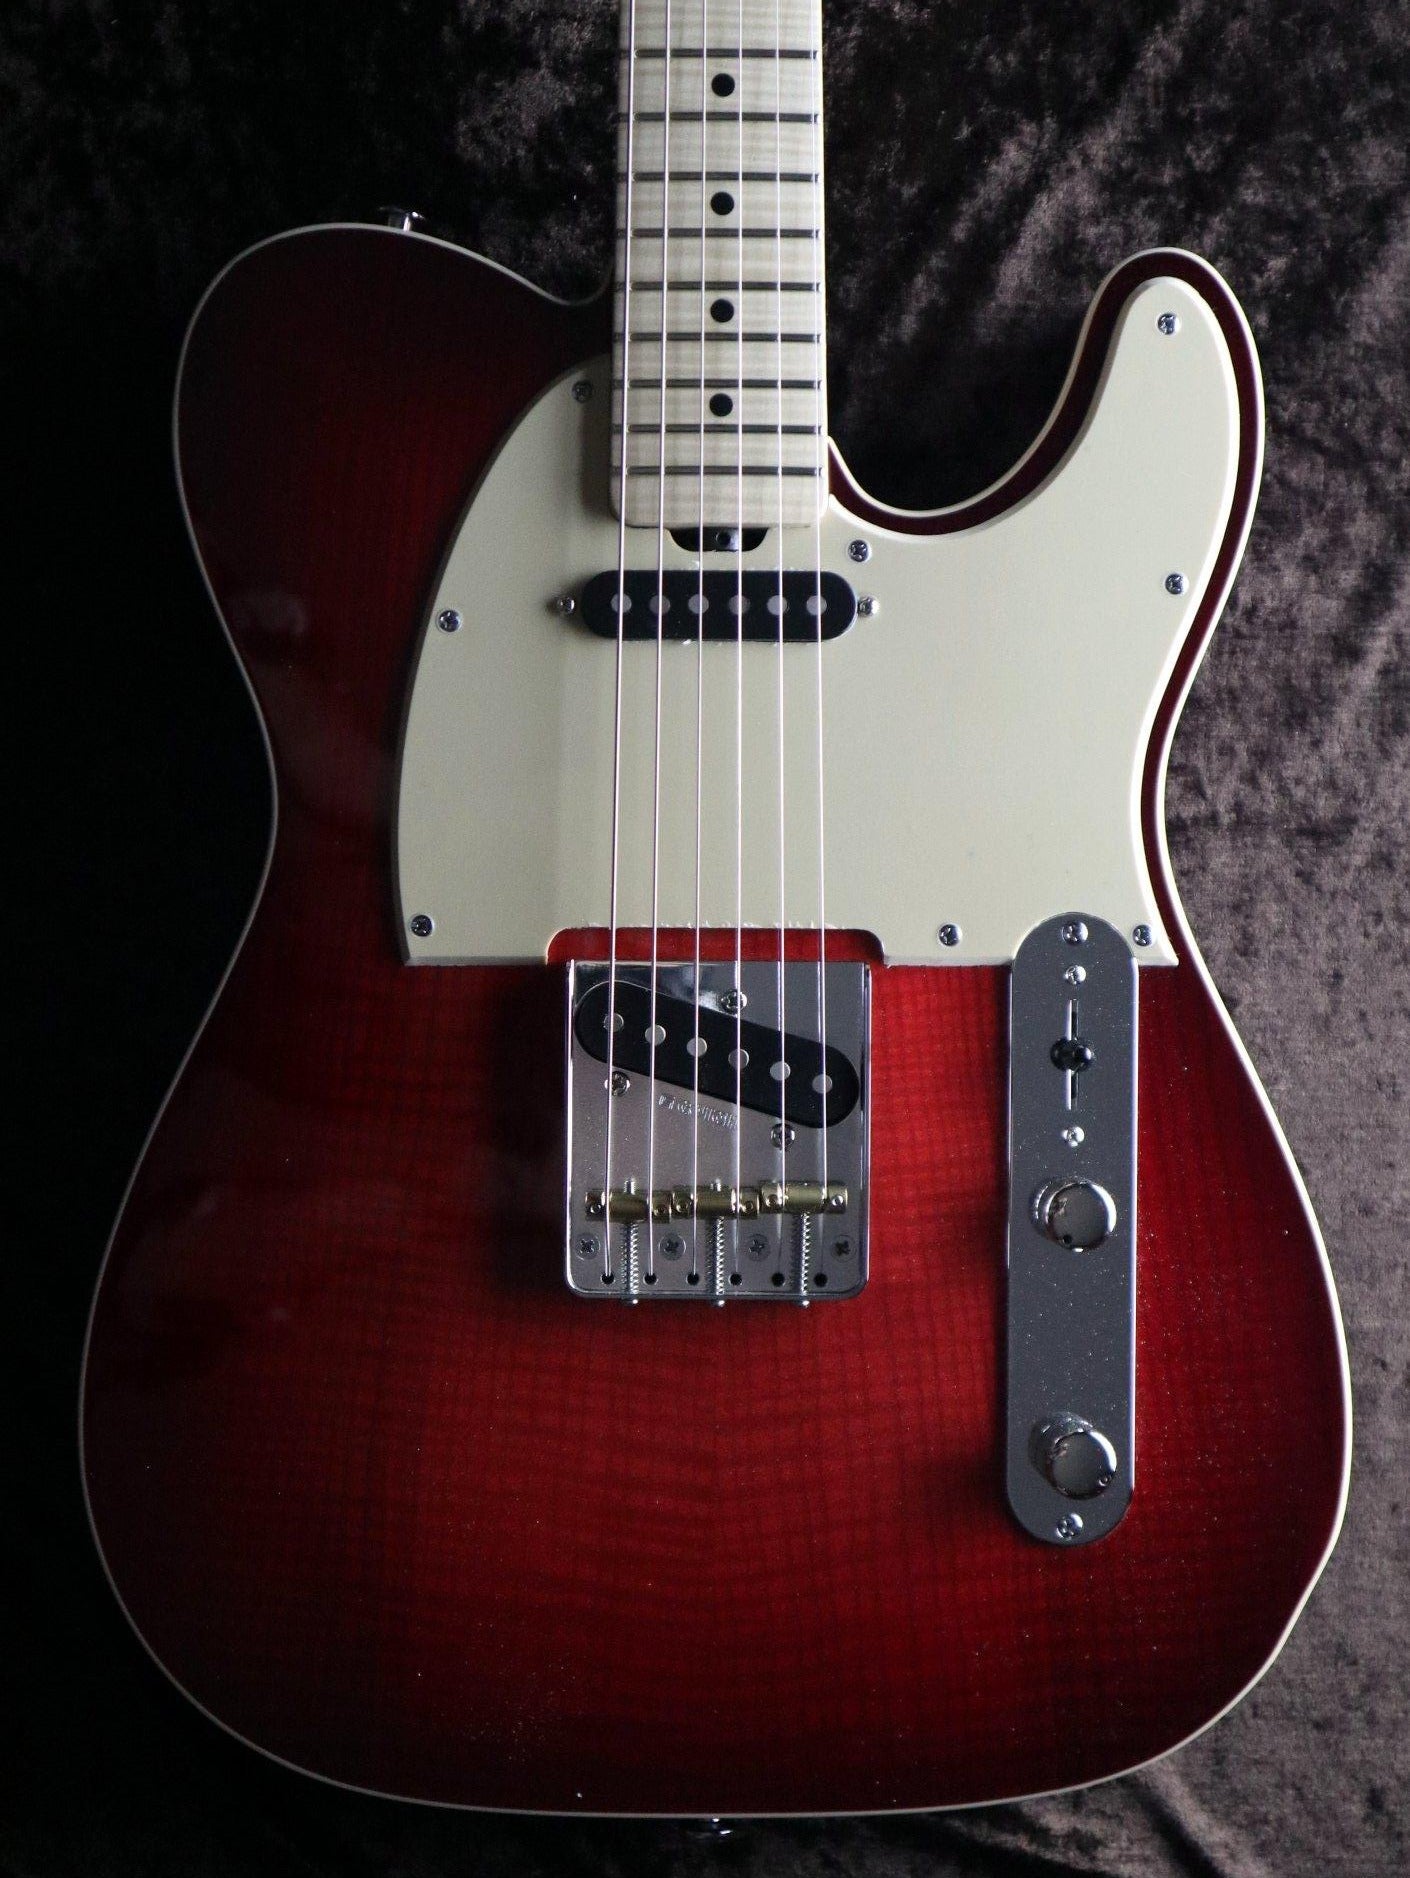 Gordon Smith Classic T "Custom" Trans Red Flame Maple Neck, Electric Guitar for sale at Richards Guitars.